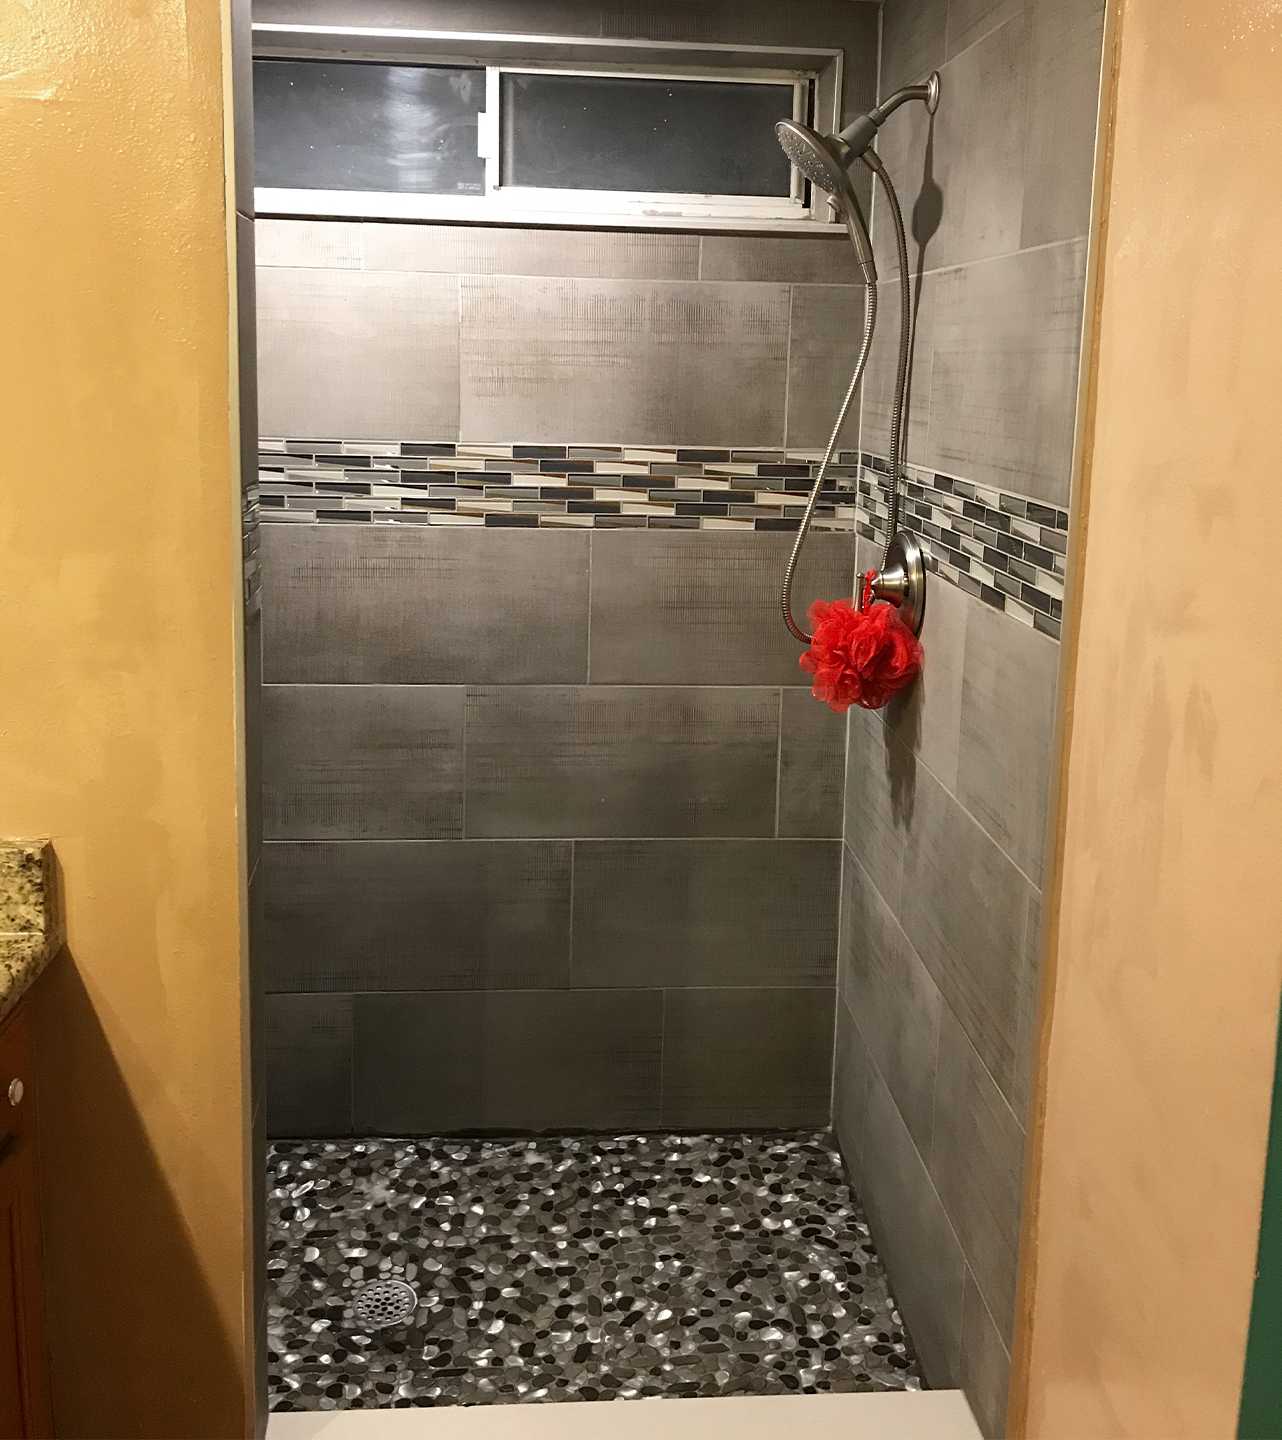 Charcoal and gray slate tile make up a beautiful renovated shower